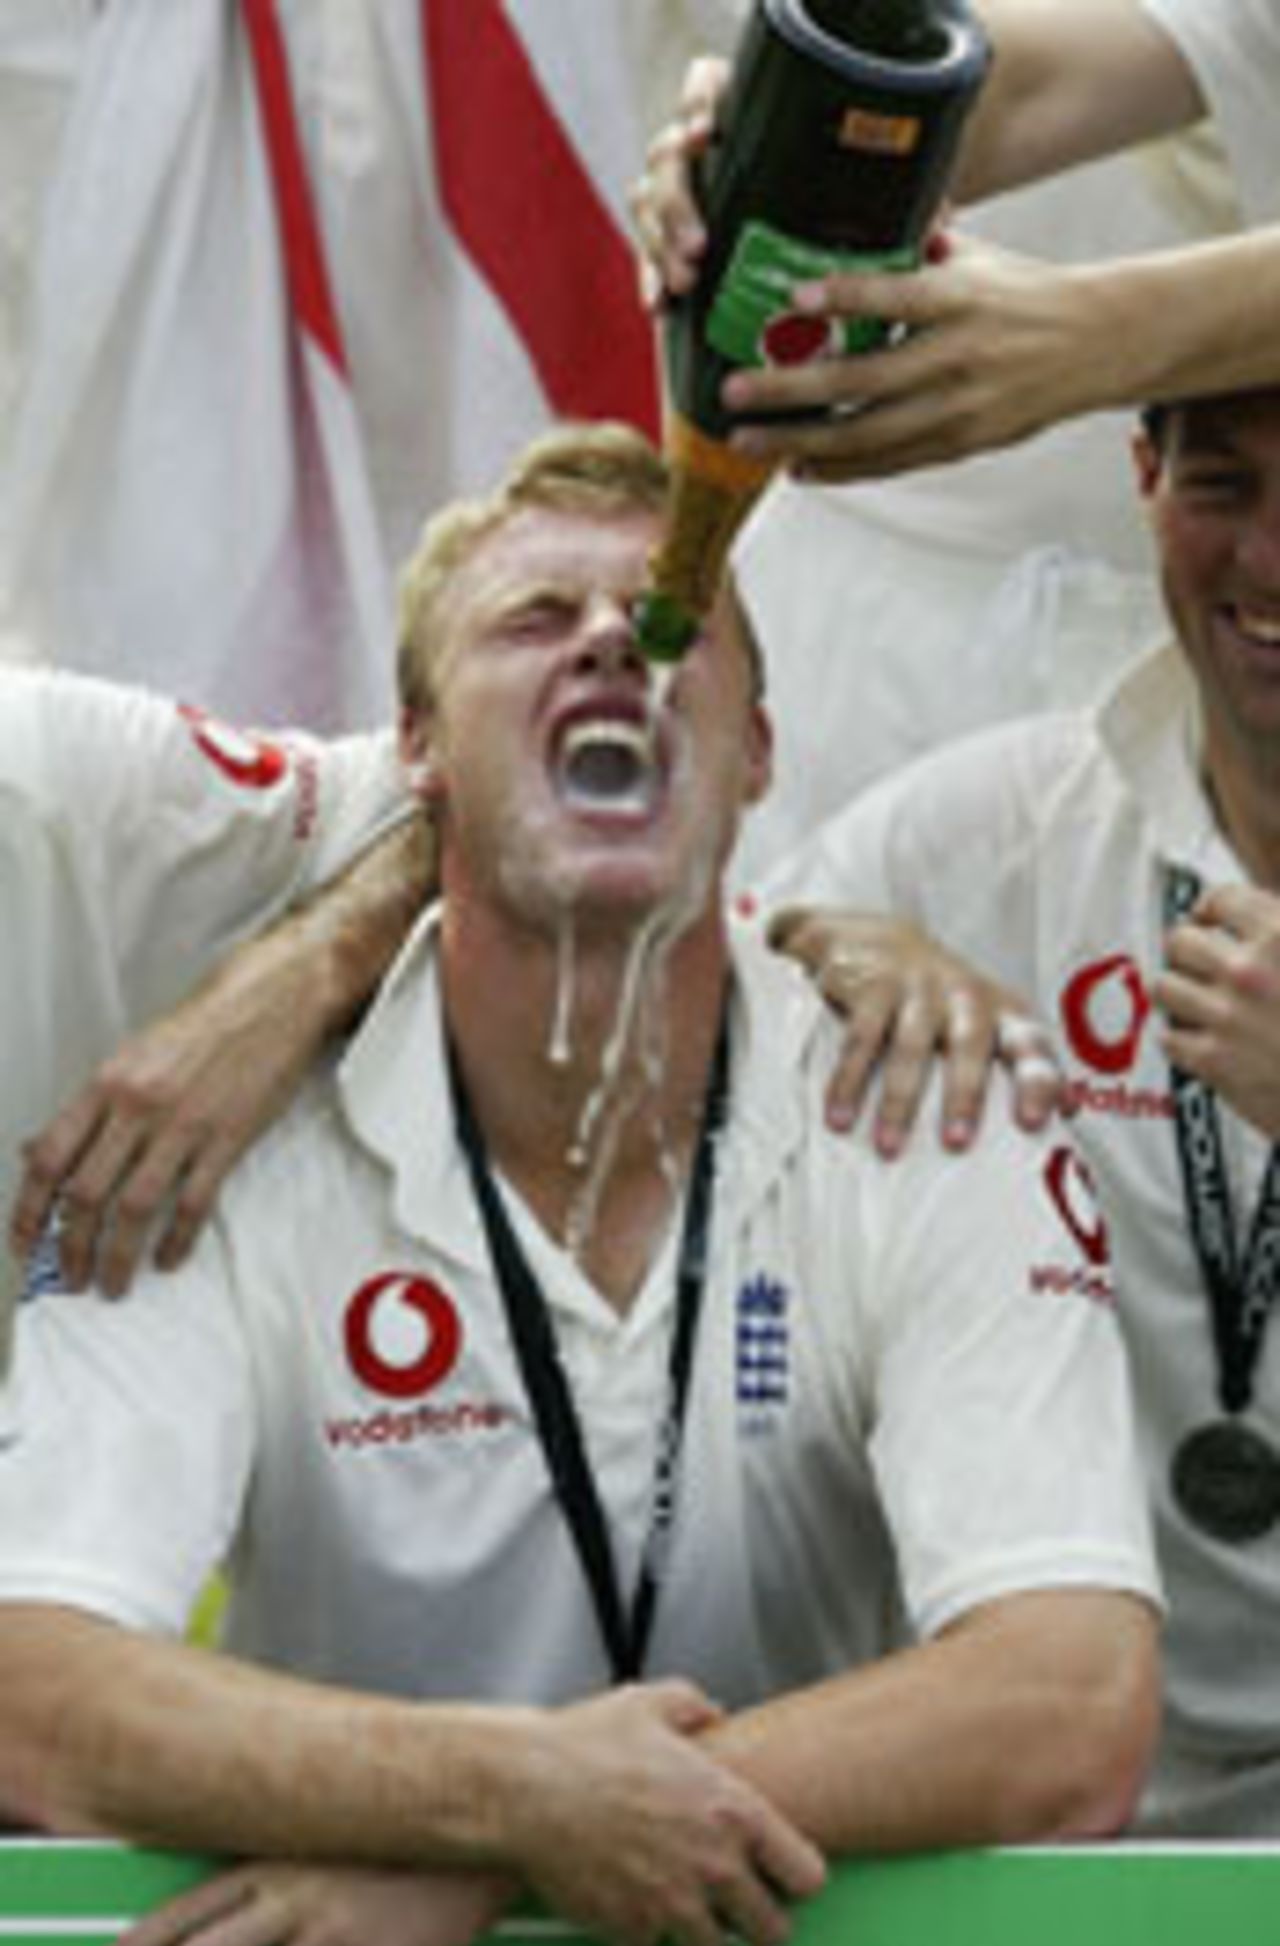 Andrew Flintoff guzzling champagne, 5th Test v SA, The Oval